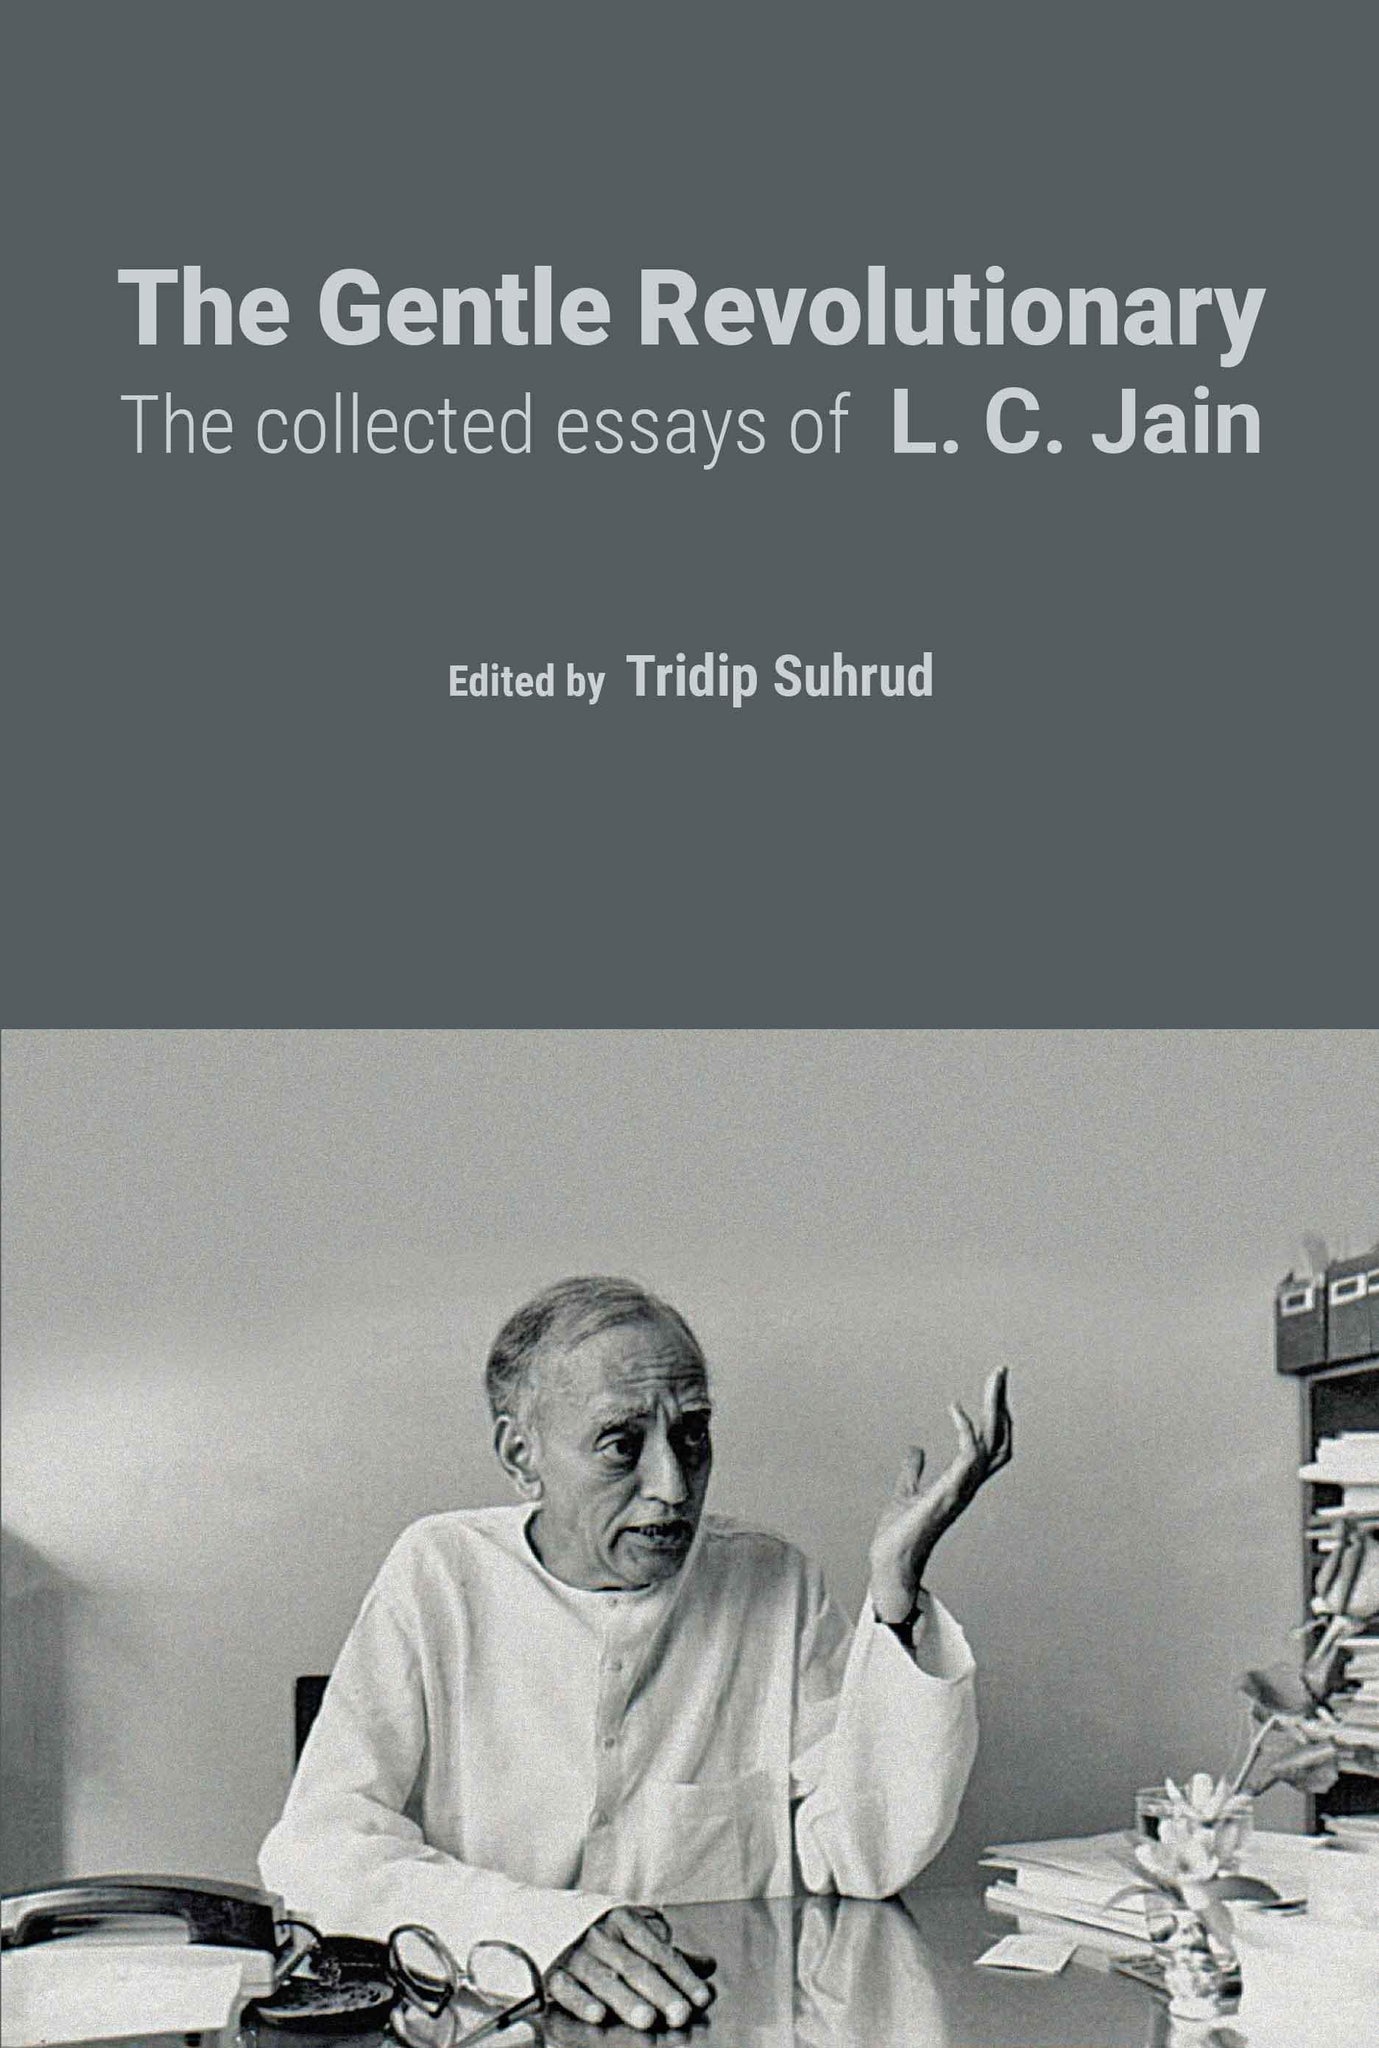 The Gentle Revolutionary—The Collected Essays of L. C. Jain